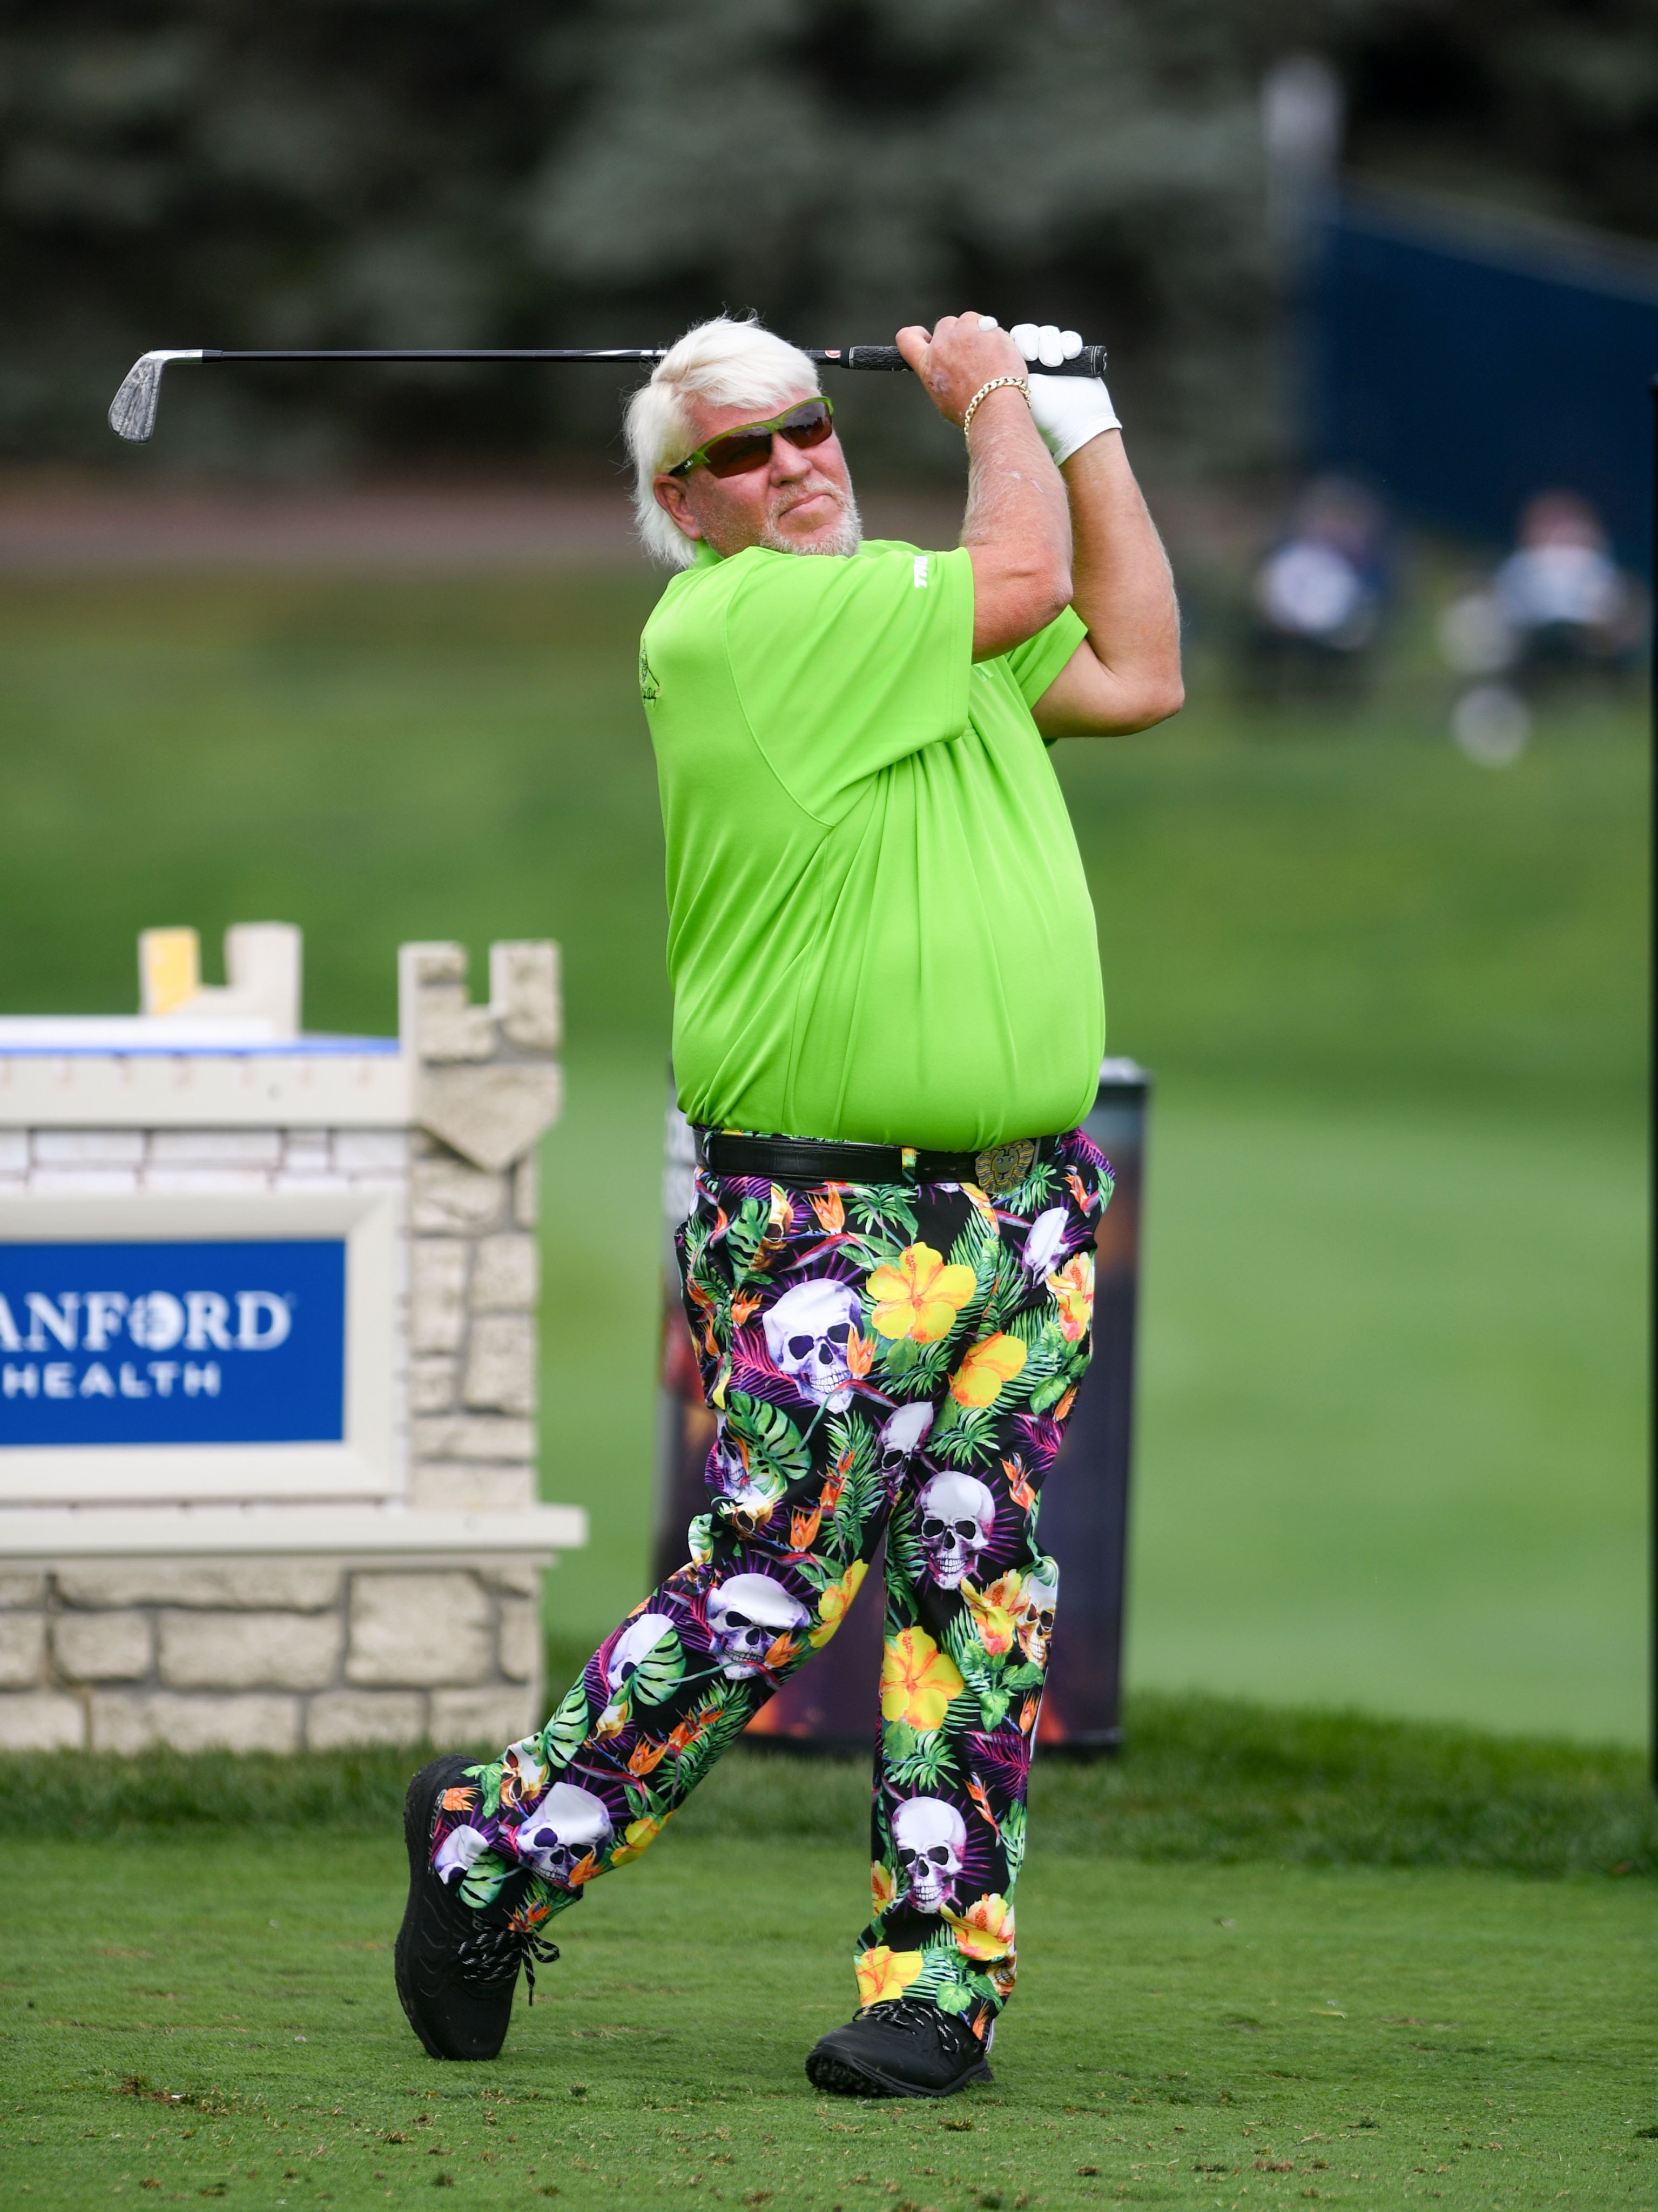 Erin Woodiel on X: John Daly outfit of the day - jungle skull pants with  lion belt buckle and glowing green shirt. @SanfordIntl   / X